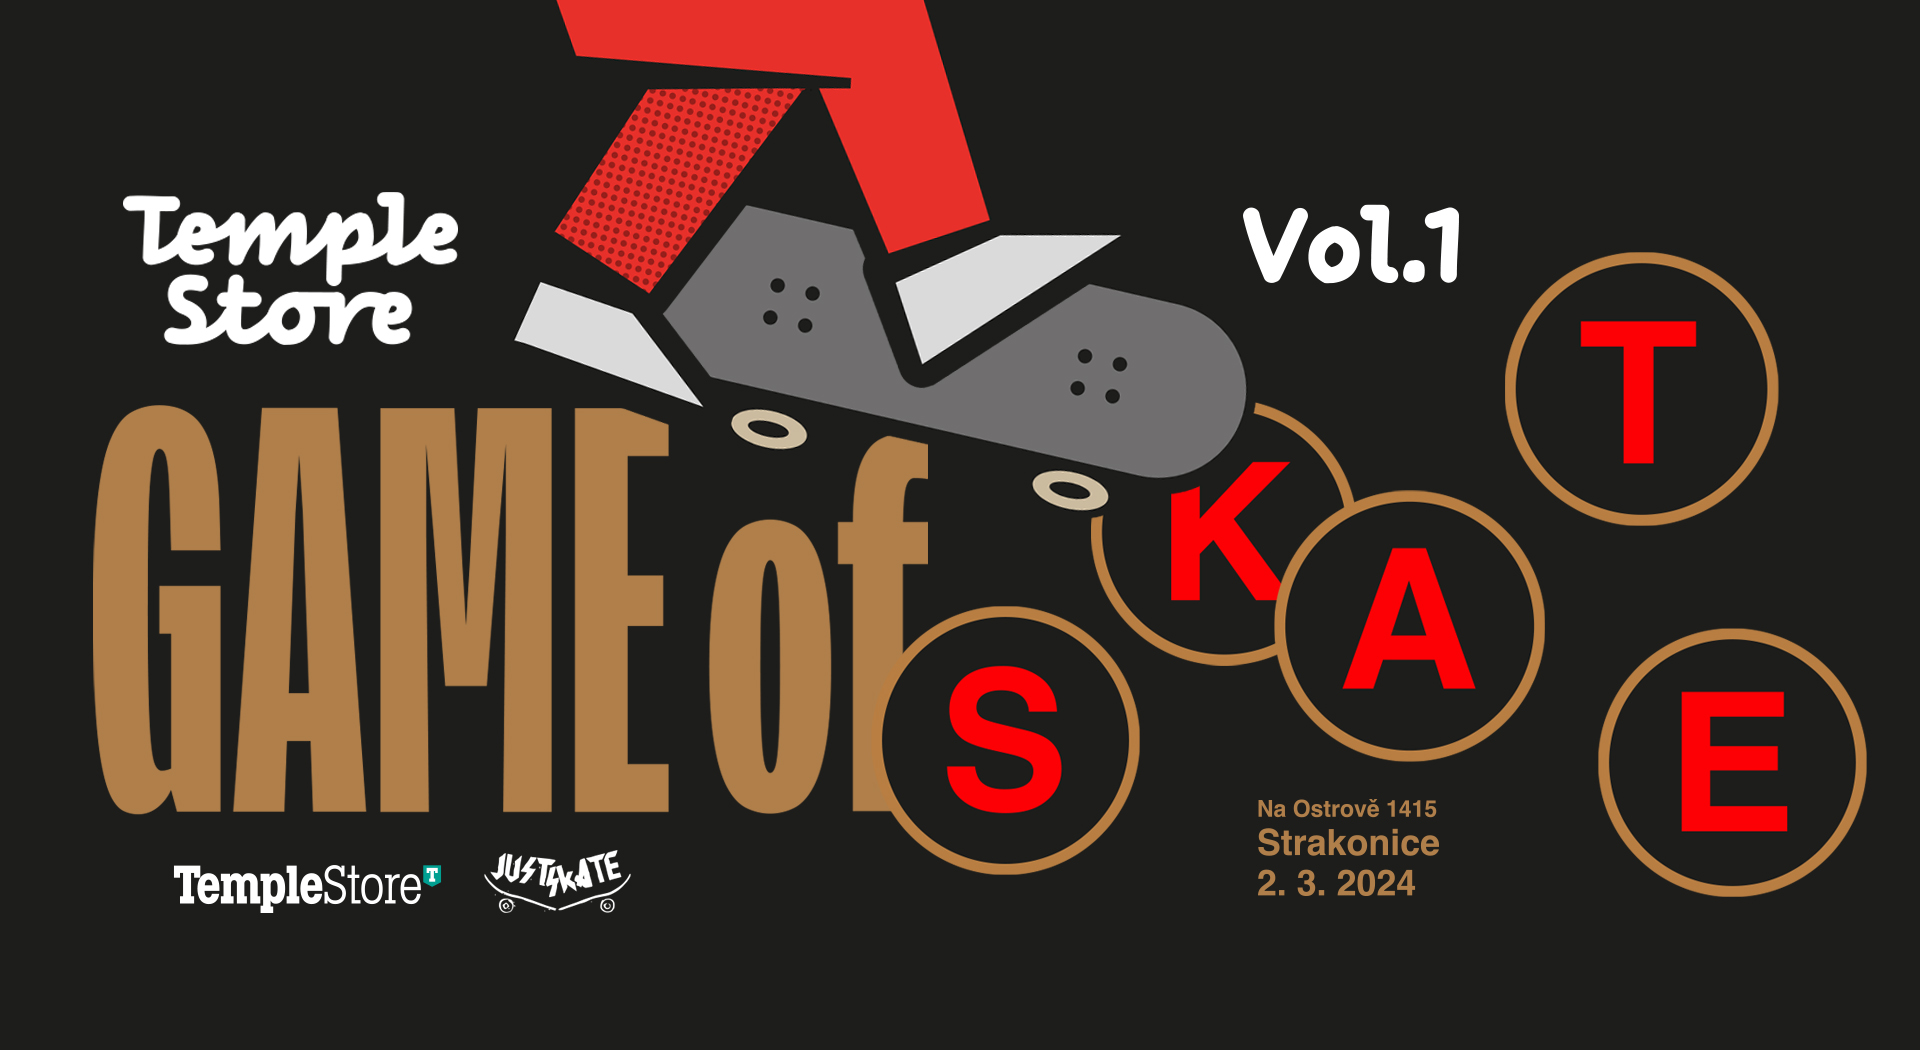 Temple store Game of skate vol. 1